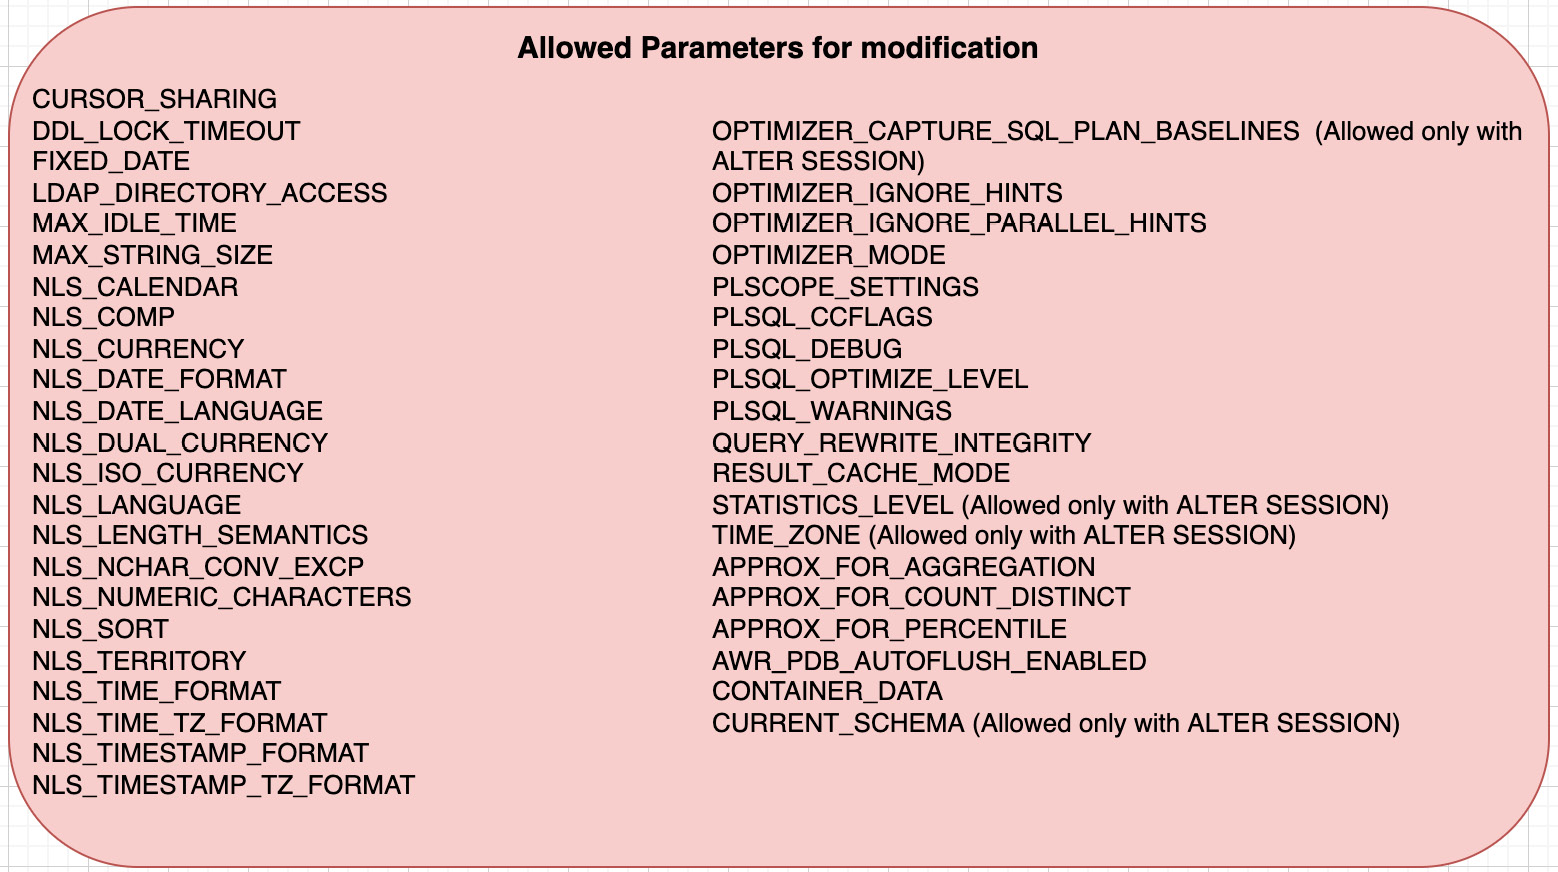 Figure 1.3 – List of allowed parameters for modification in ADB
